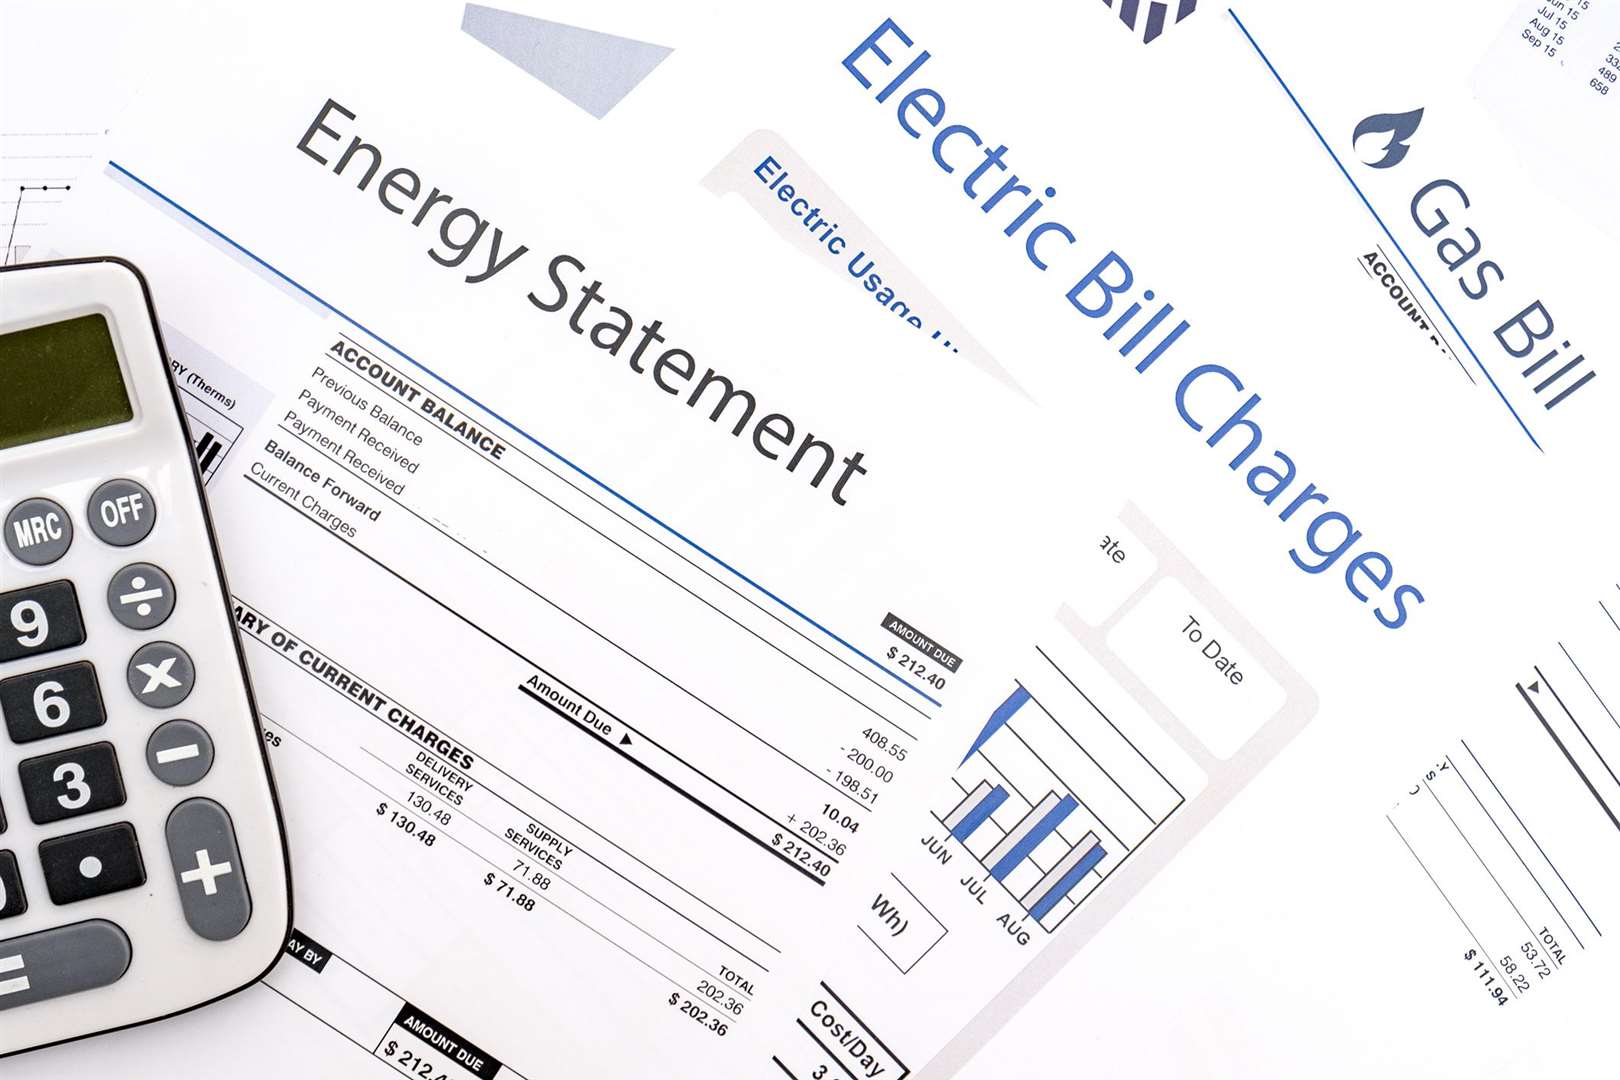 Energy bills are set to rise this winter with an increase to the energy price cap